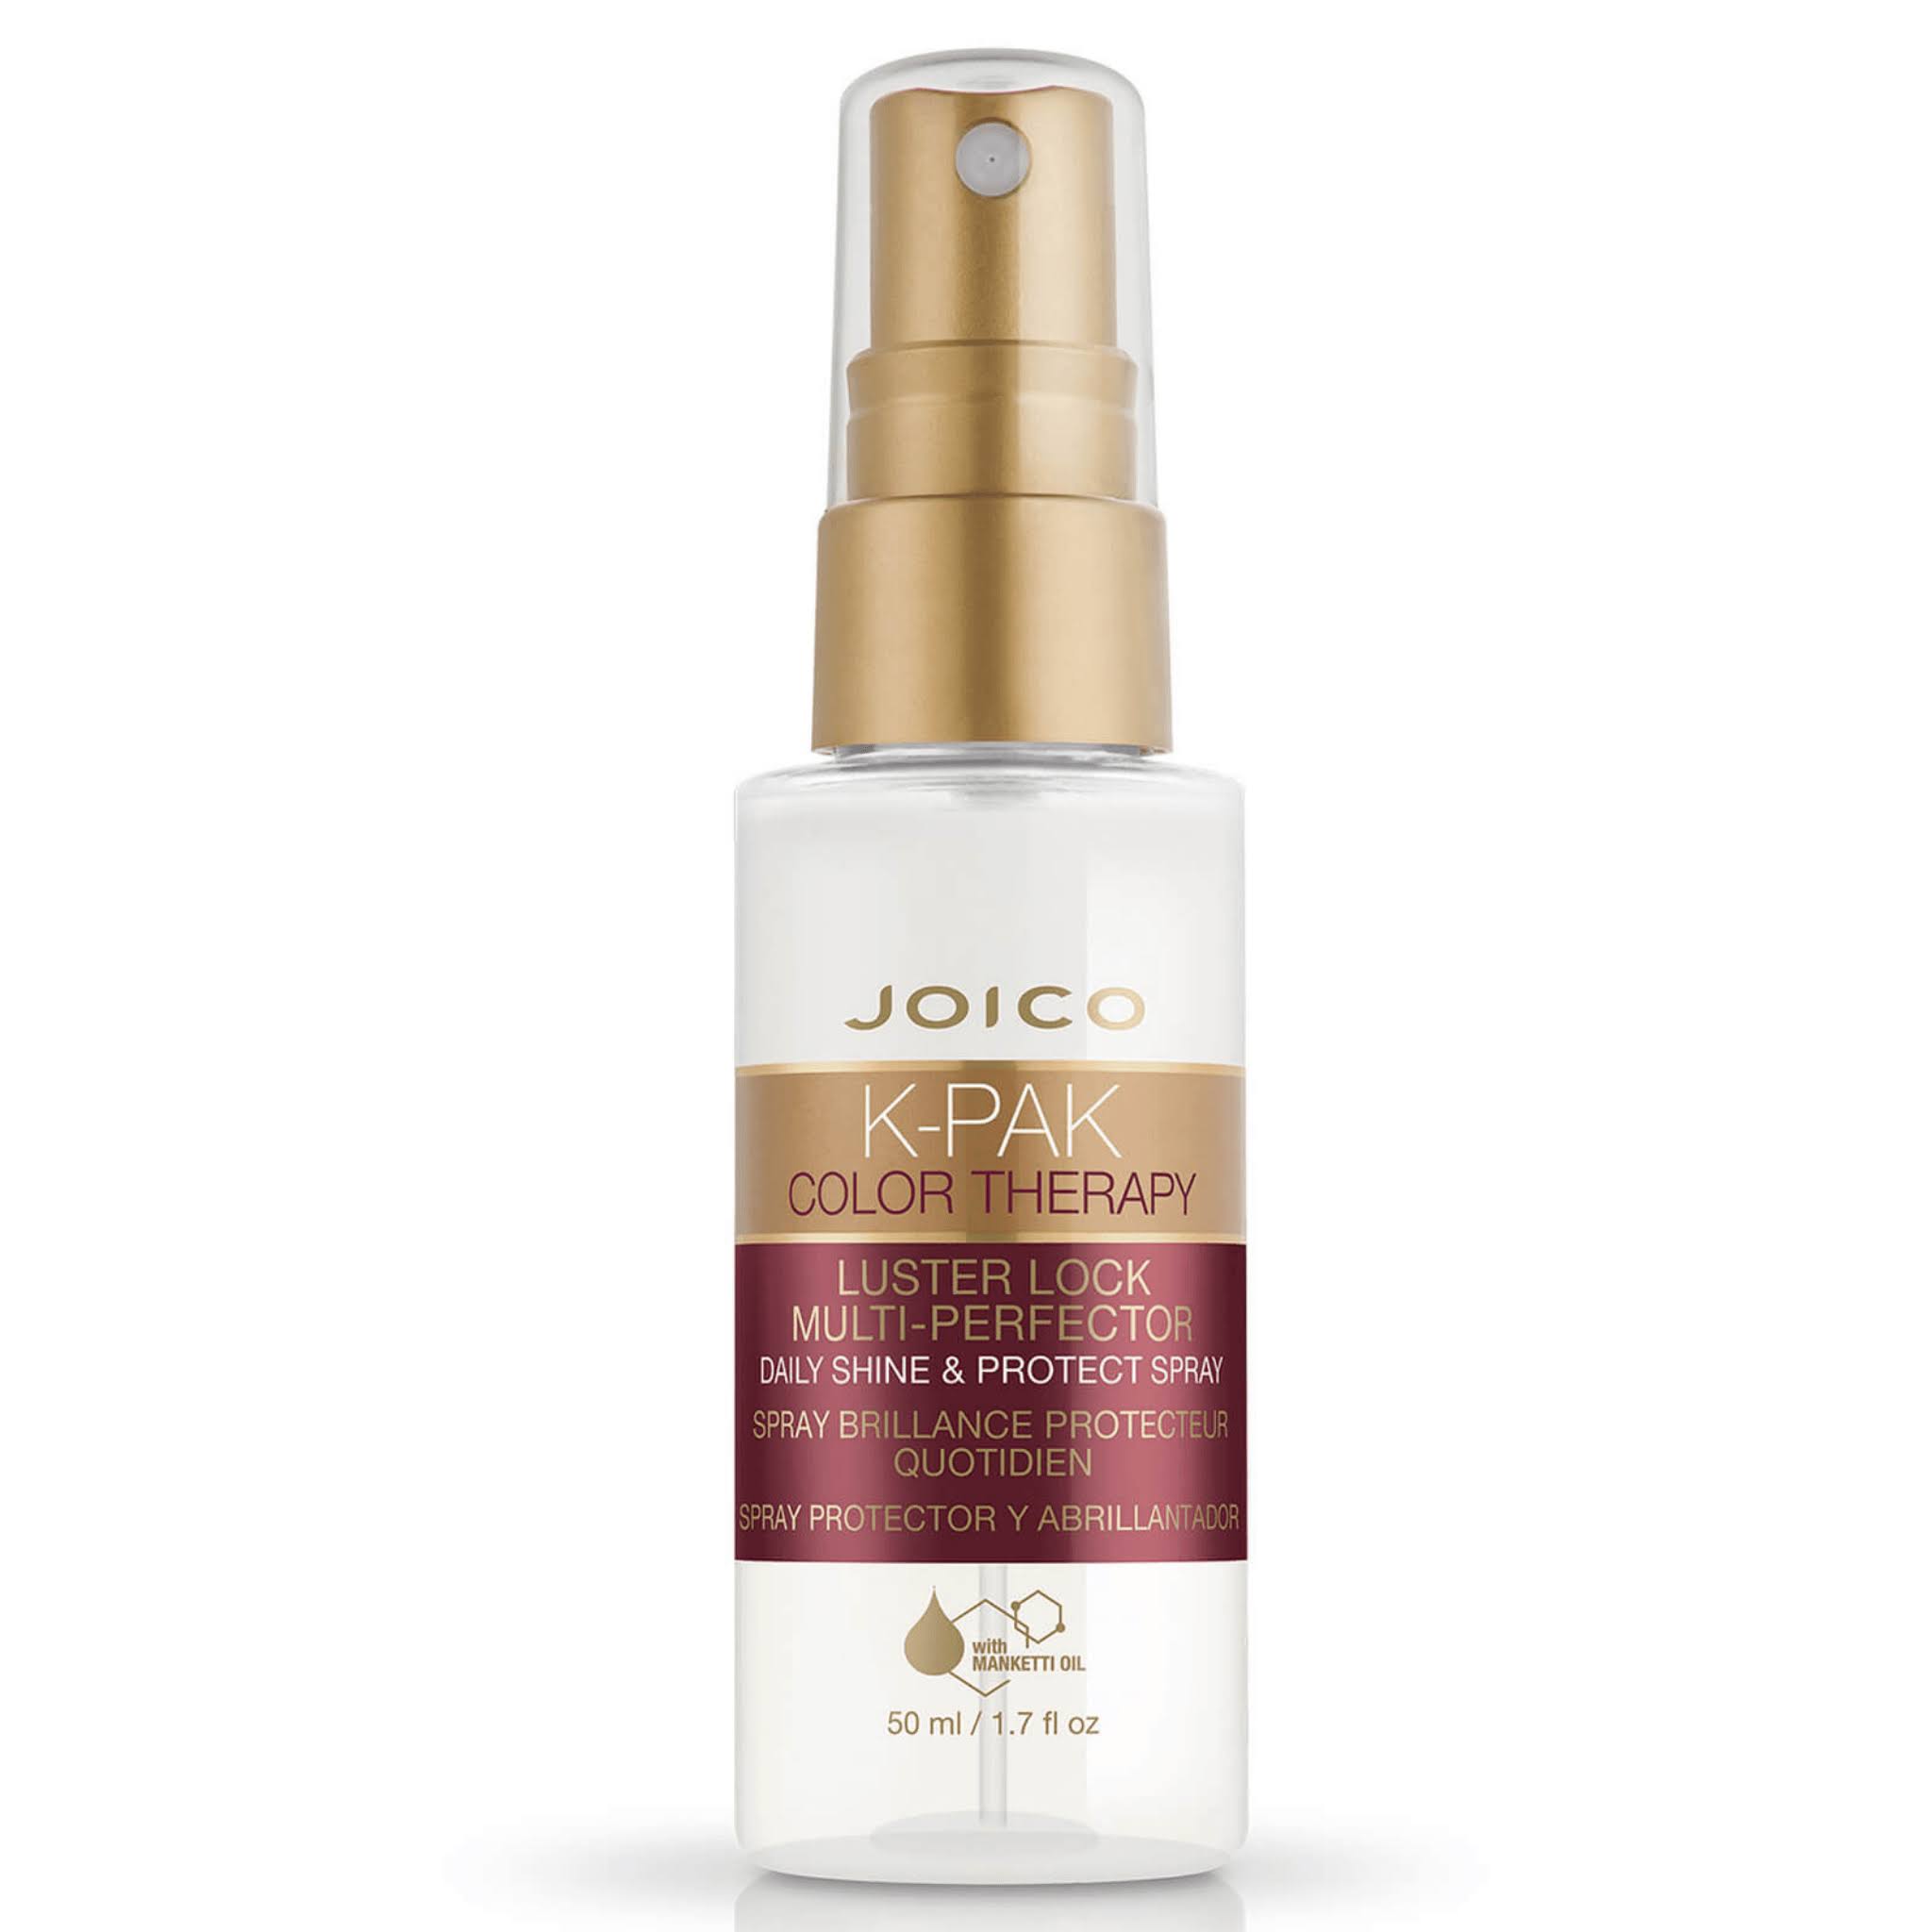 Joico Spray Multi-Perfector Luster Lock color therapy k-pak 50 ml